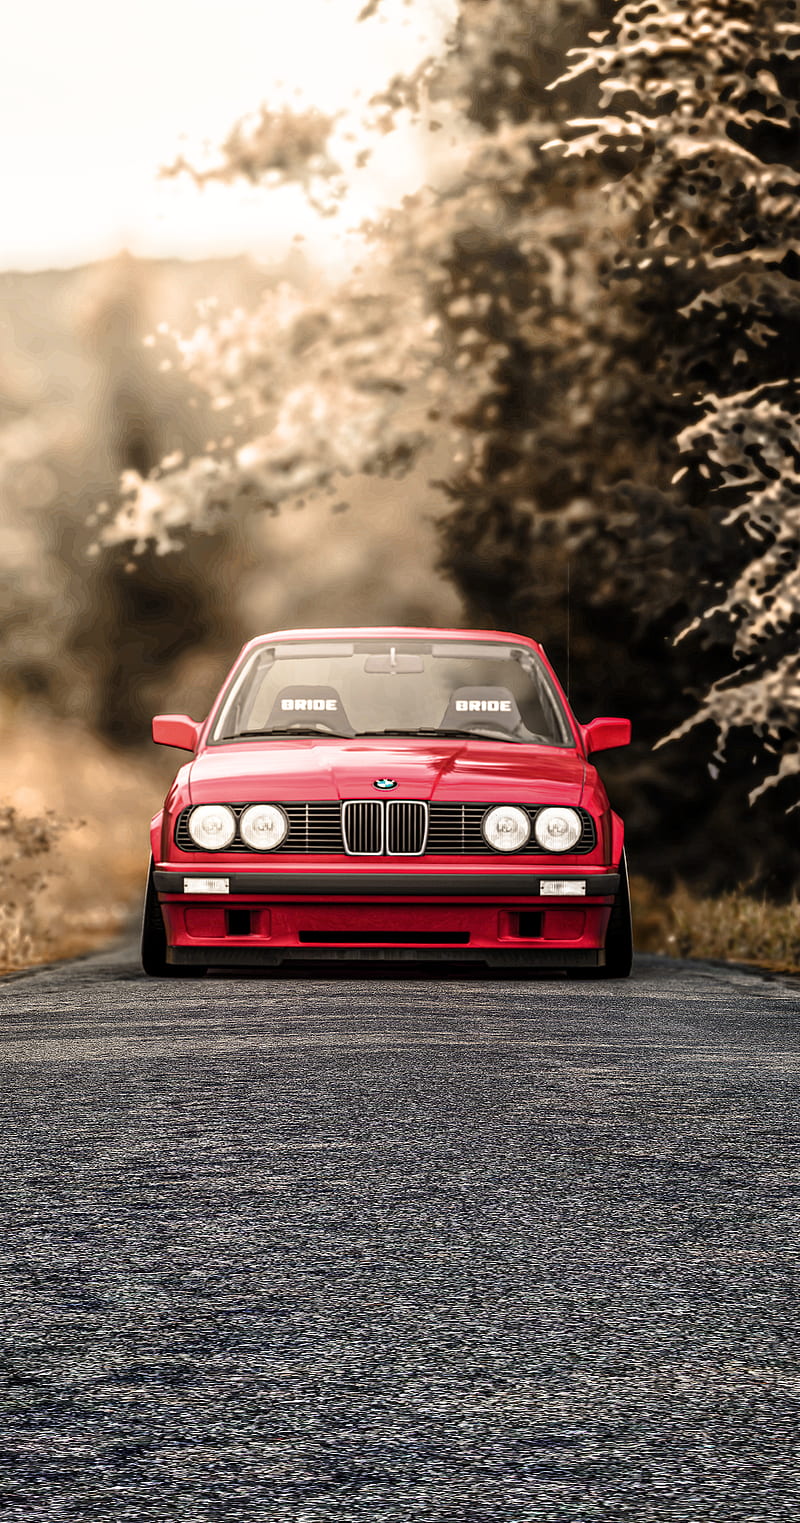 Red Bmw 325i 0 Car Drift Muscle Power White Hd Mobile Wallpaper Peakpx